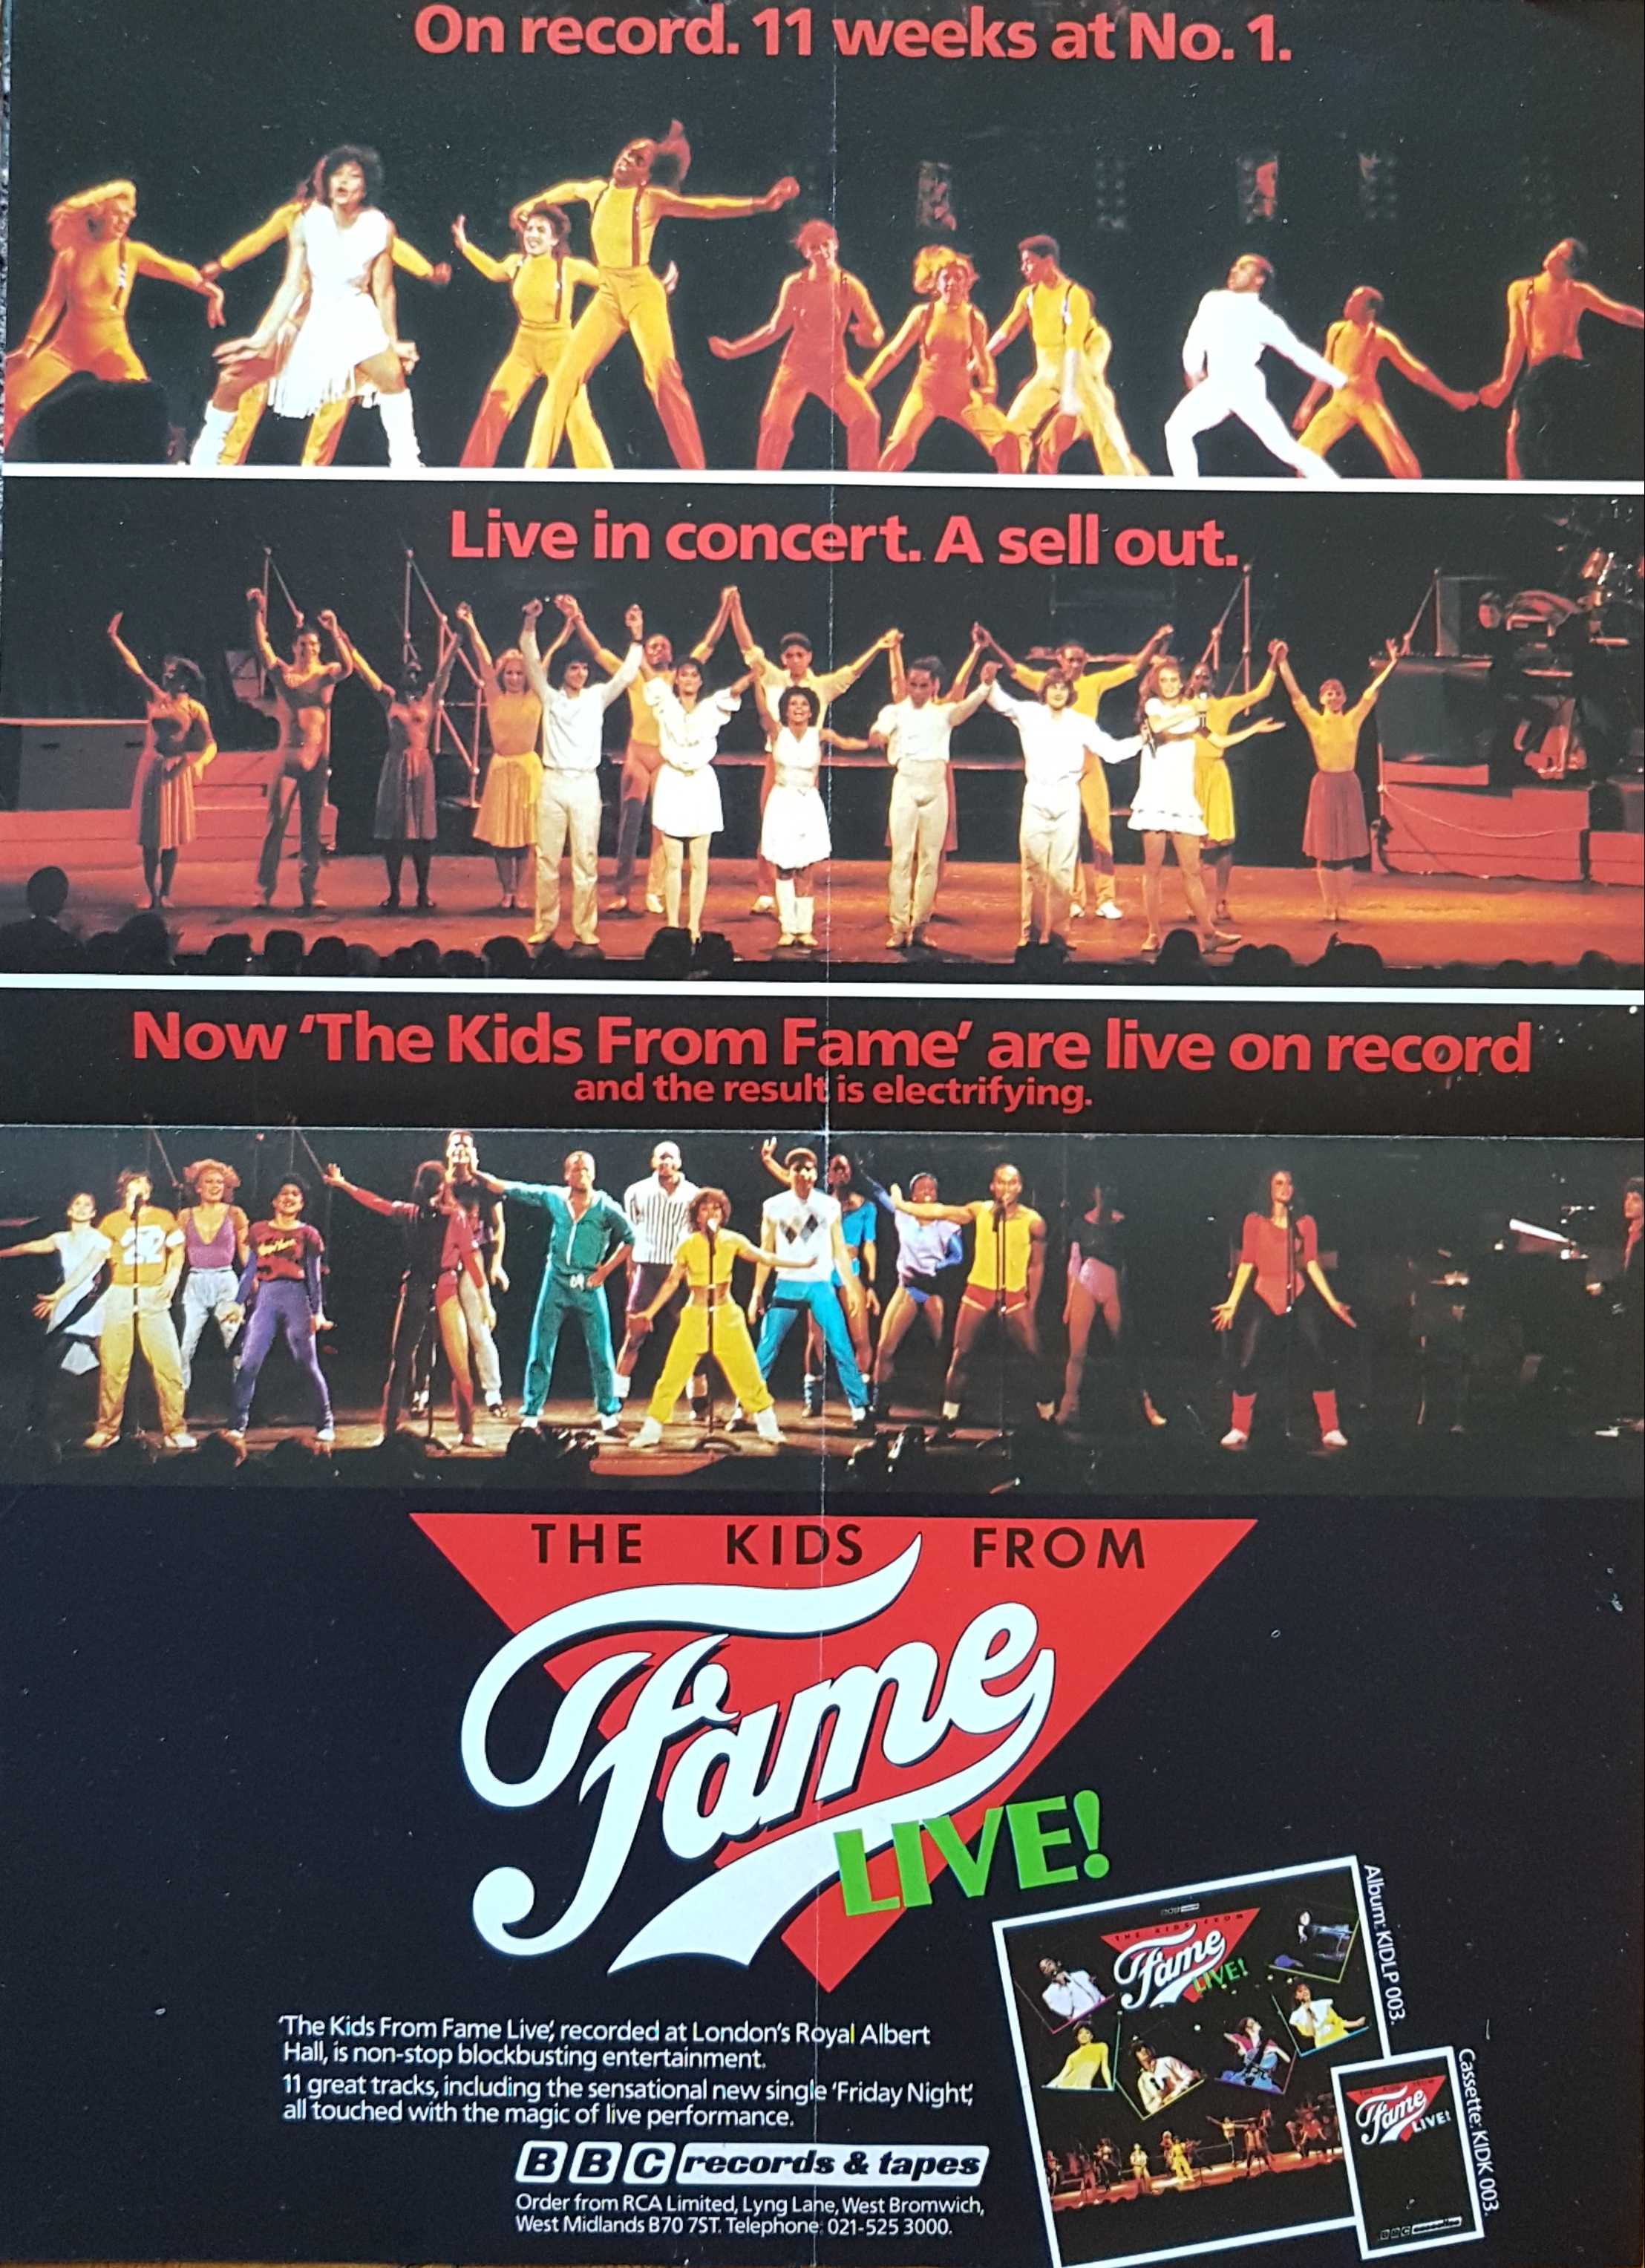 Picture of The kids from Fame live! by artist Unknown from the BBC posters - Records and Tapes library